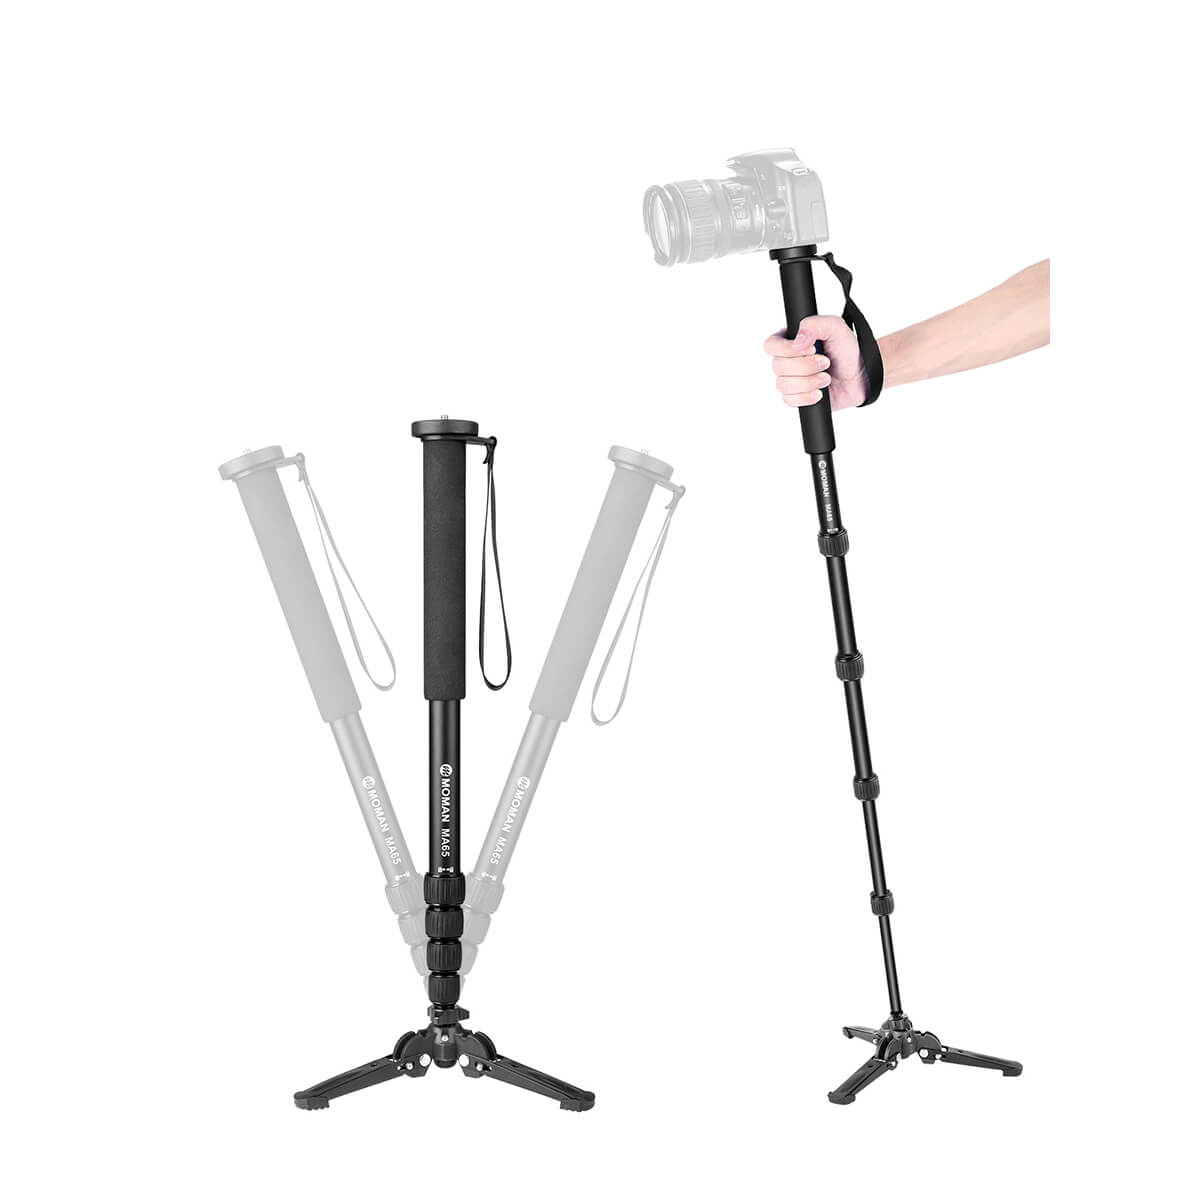 Moman MA65 monopod hiking stick can install kinds of photography devices like DSLR, GoPro, and more.